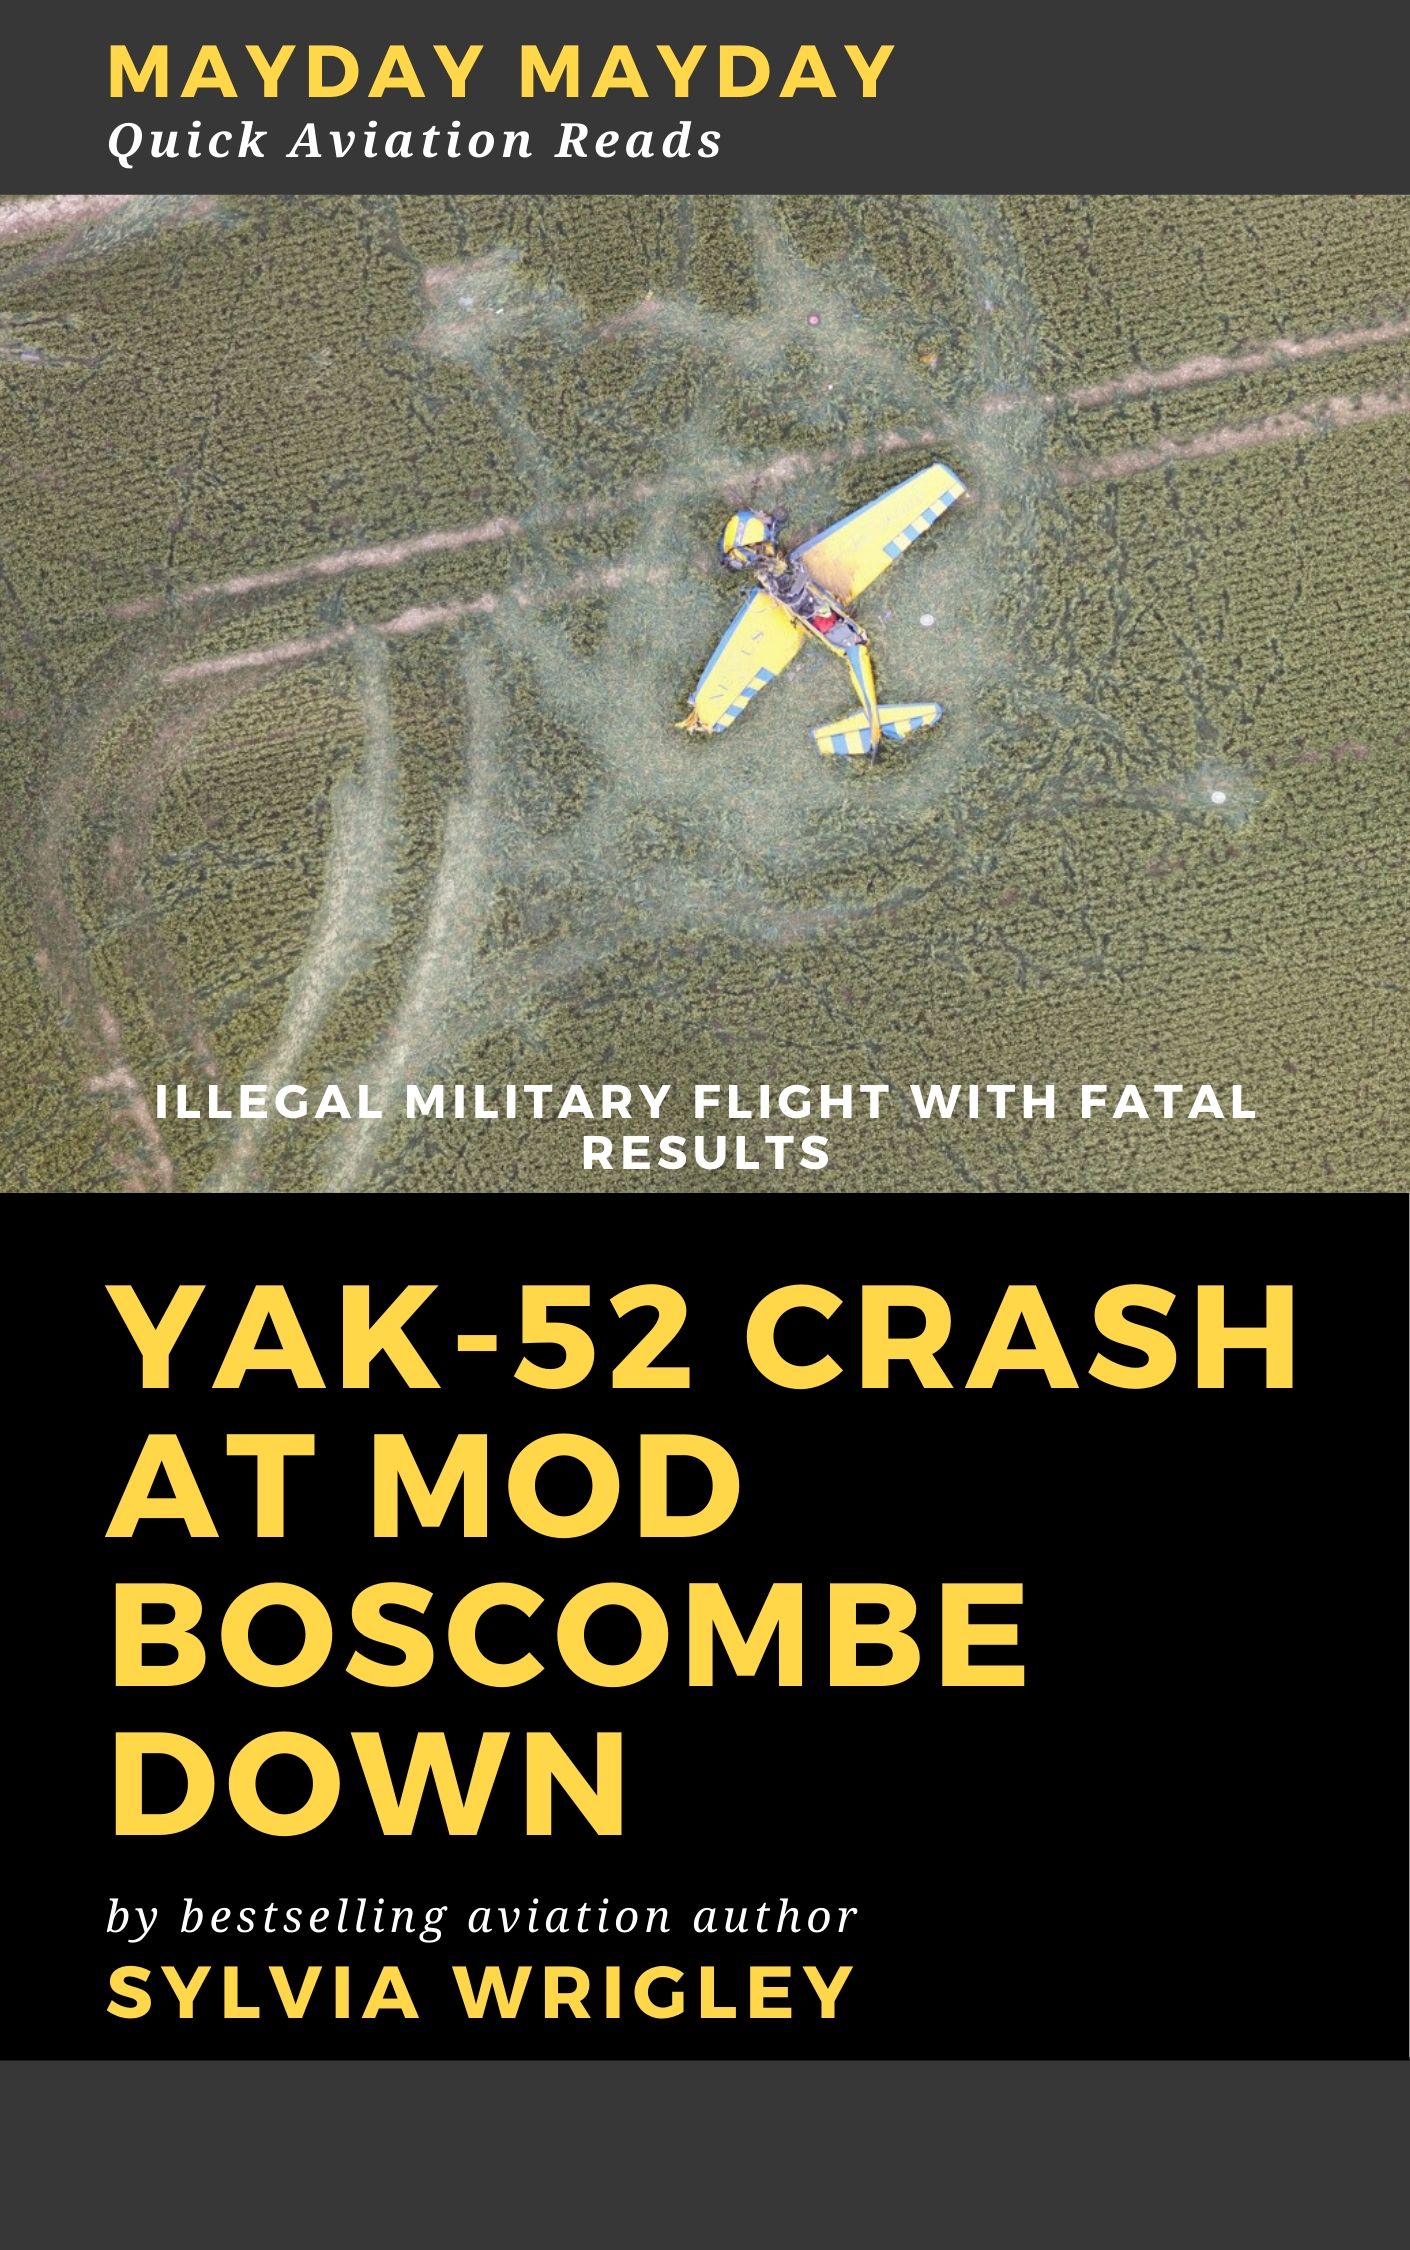 Yak-52 Crash at MoD Boscombe Down: Illegal Flight with Fatal Results